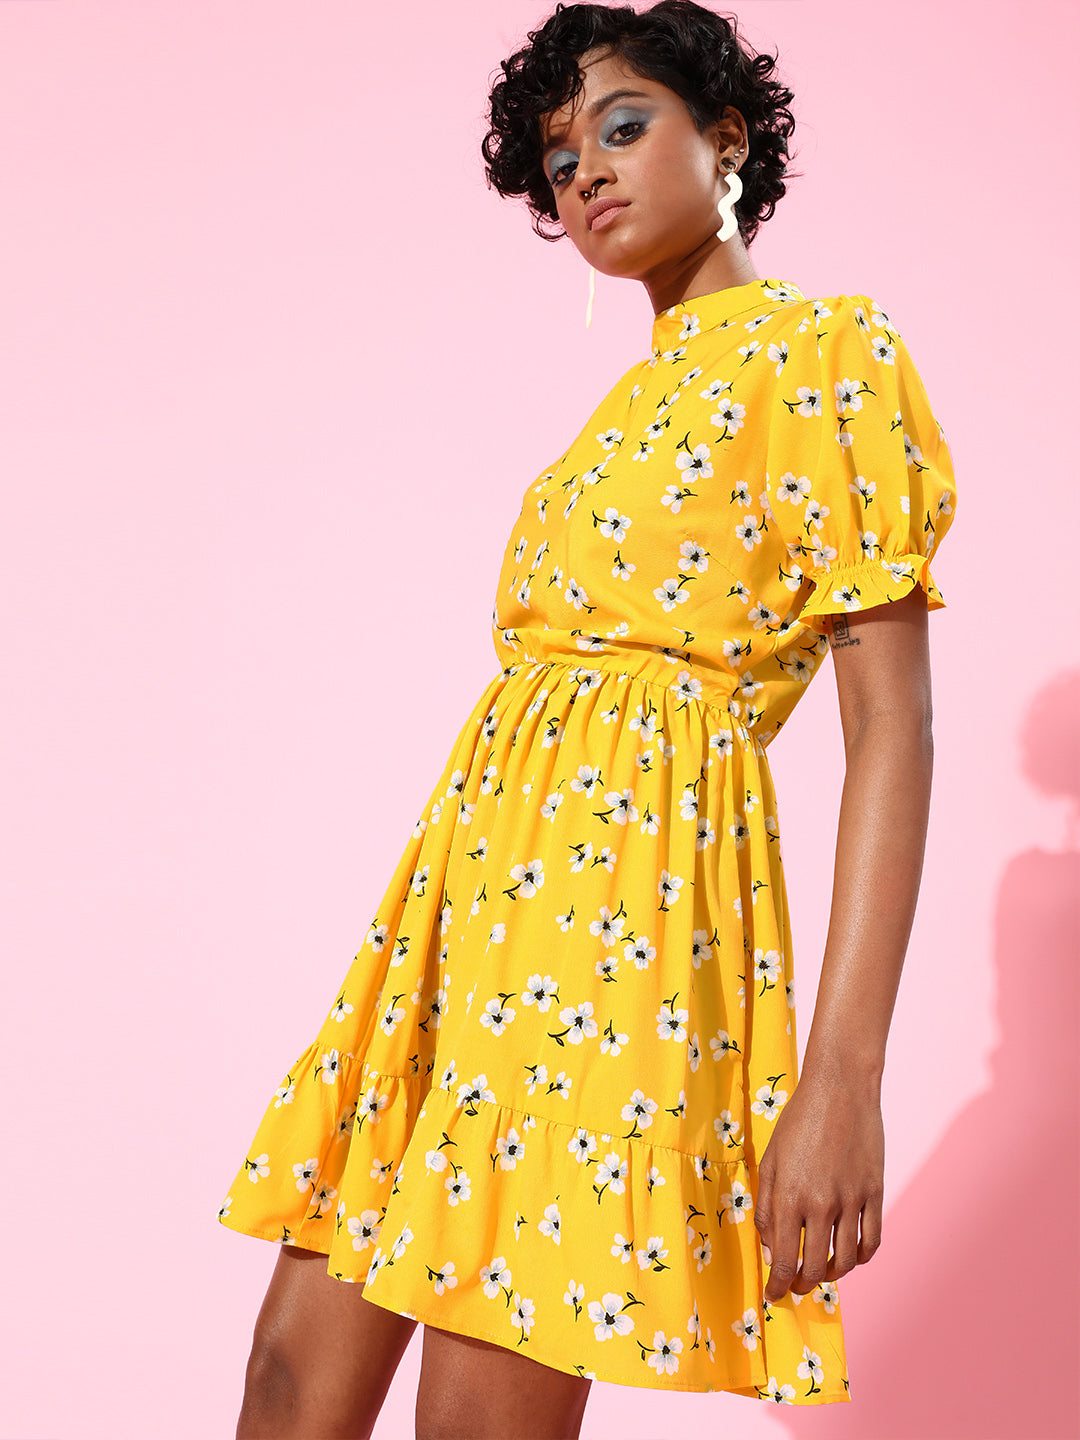 Buy Trend Arrest V-Neck Yellow Floral Dress at Amazon.in